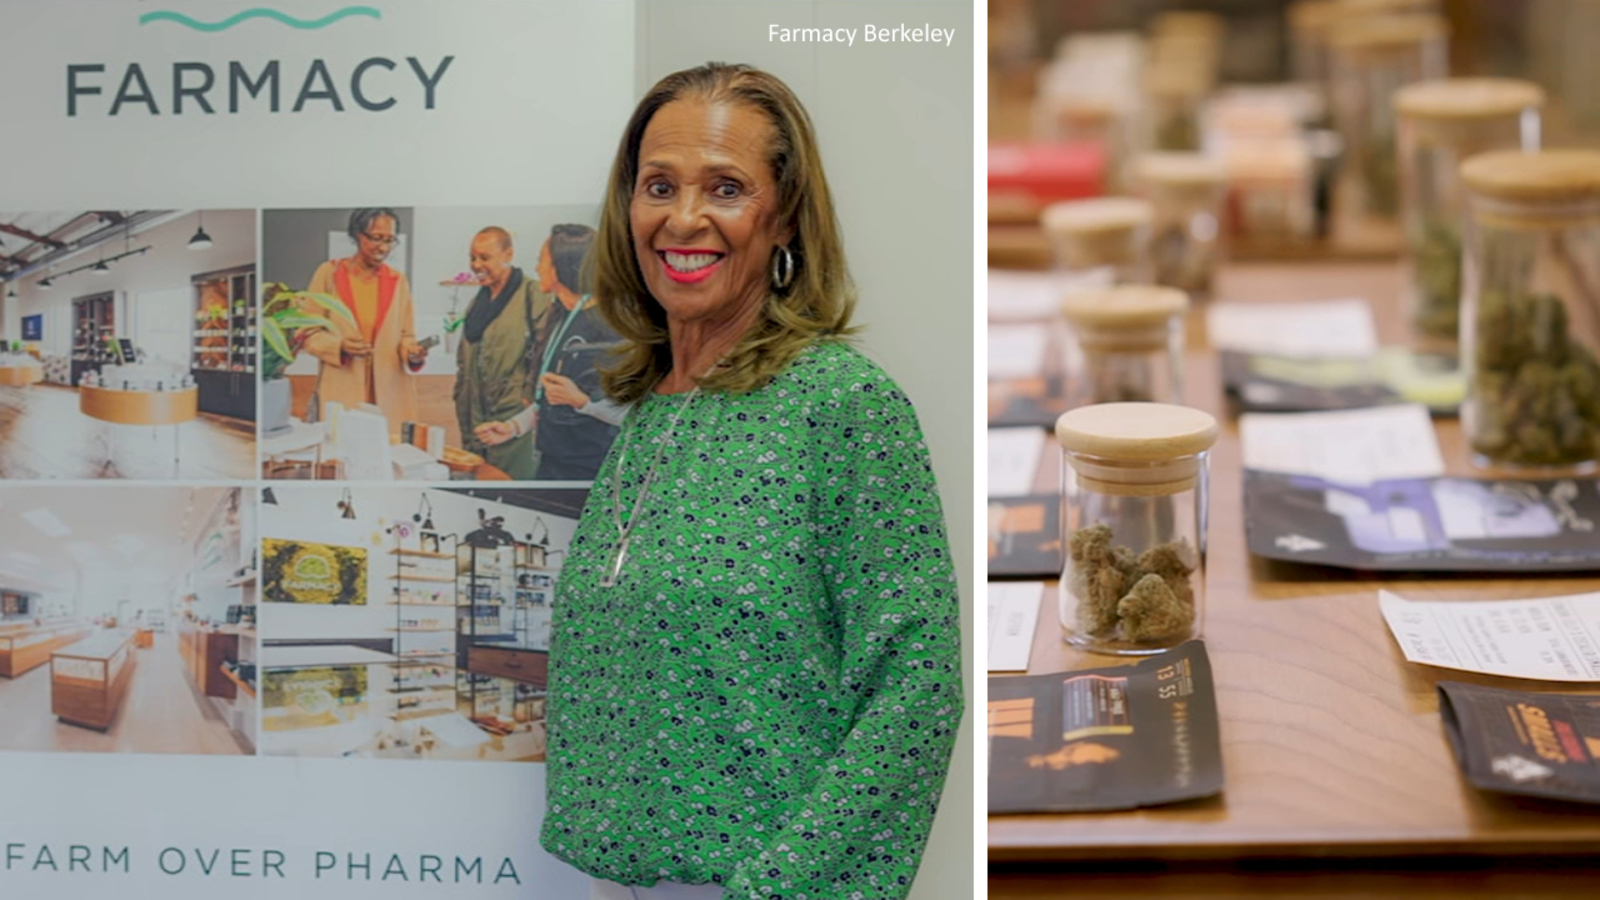 Meet Sue Taylor: Mama Sue brings cannabis to seniors while celebrating Berkeley Black-owned businesses during Black History Month [Video]